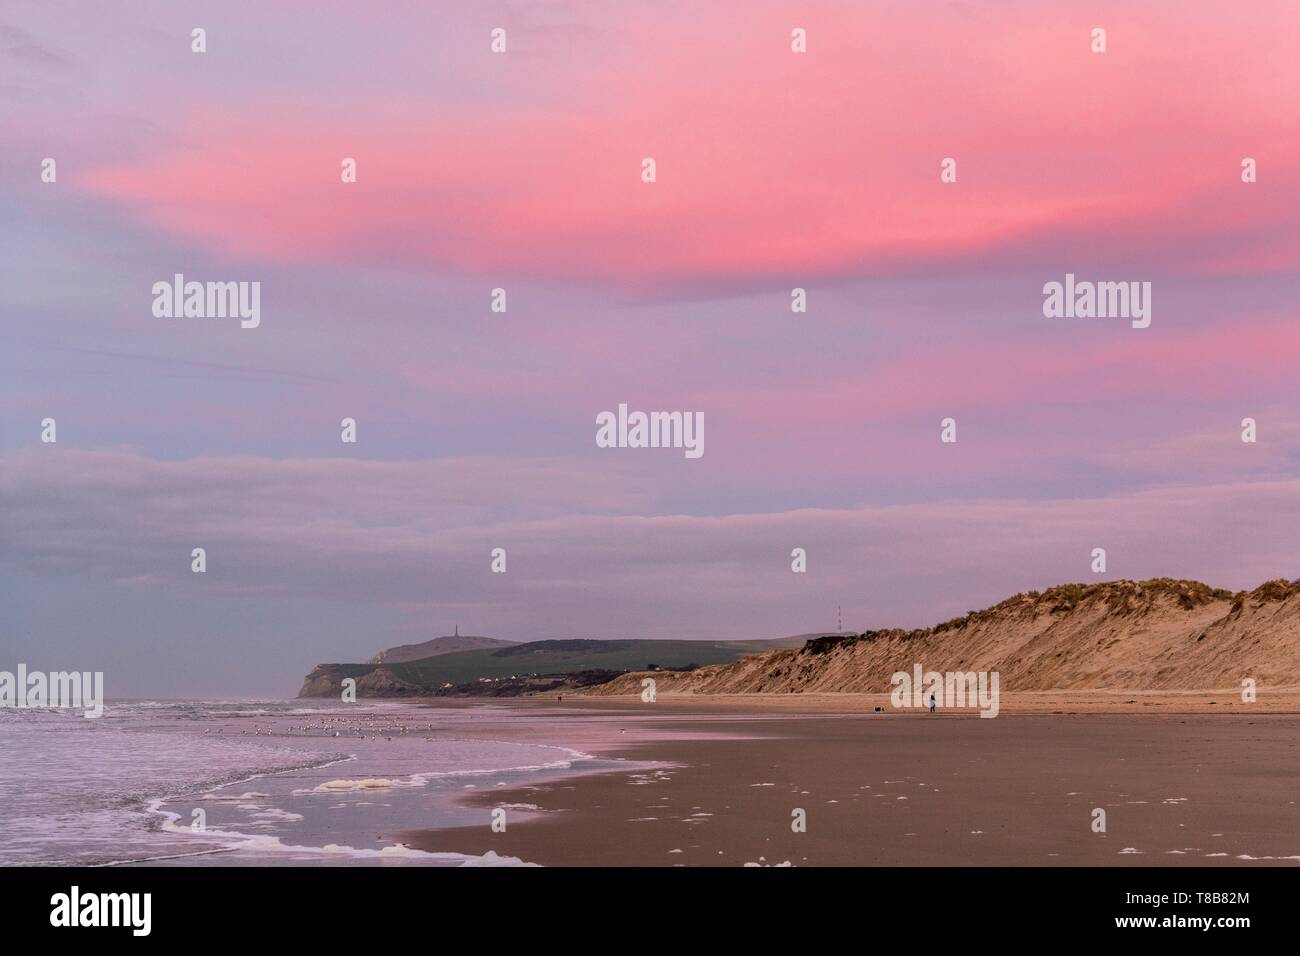 France, Pas de Calais, Opal Coast, Wissant, view of the cape Blanc nez at dusk with the sky tinged with pink Stock Photo